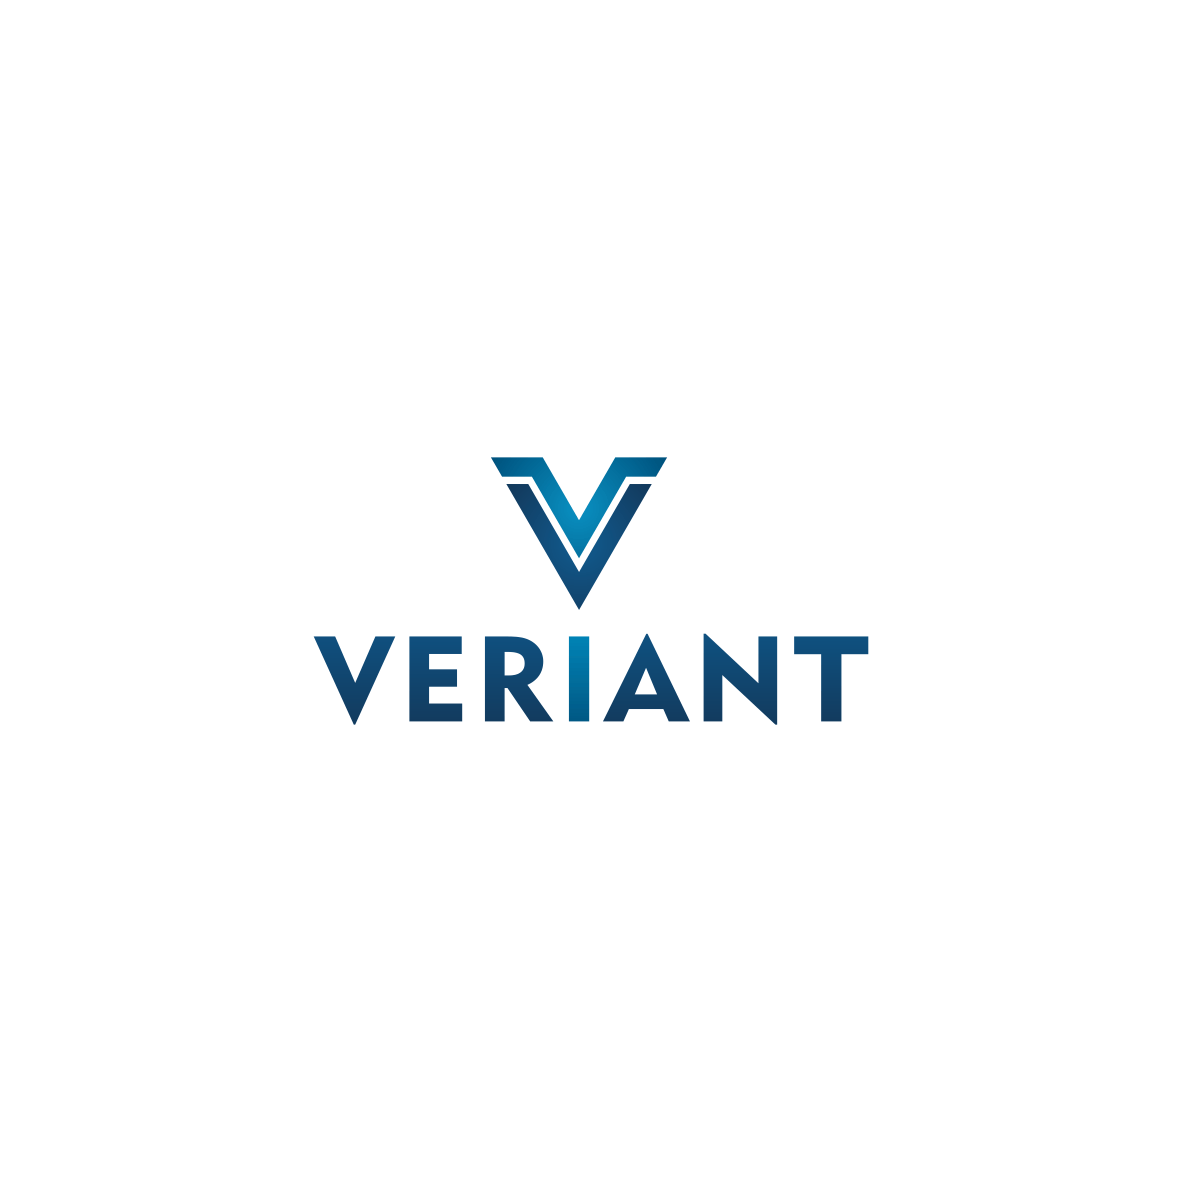 Industry Logo - Professional, Masculine, Industry Logo Design for Veriant (and a V ...